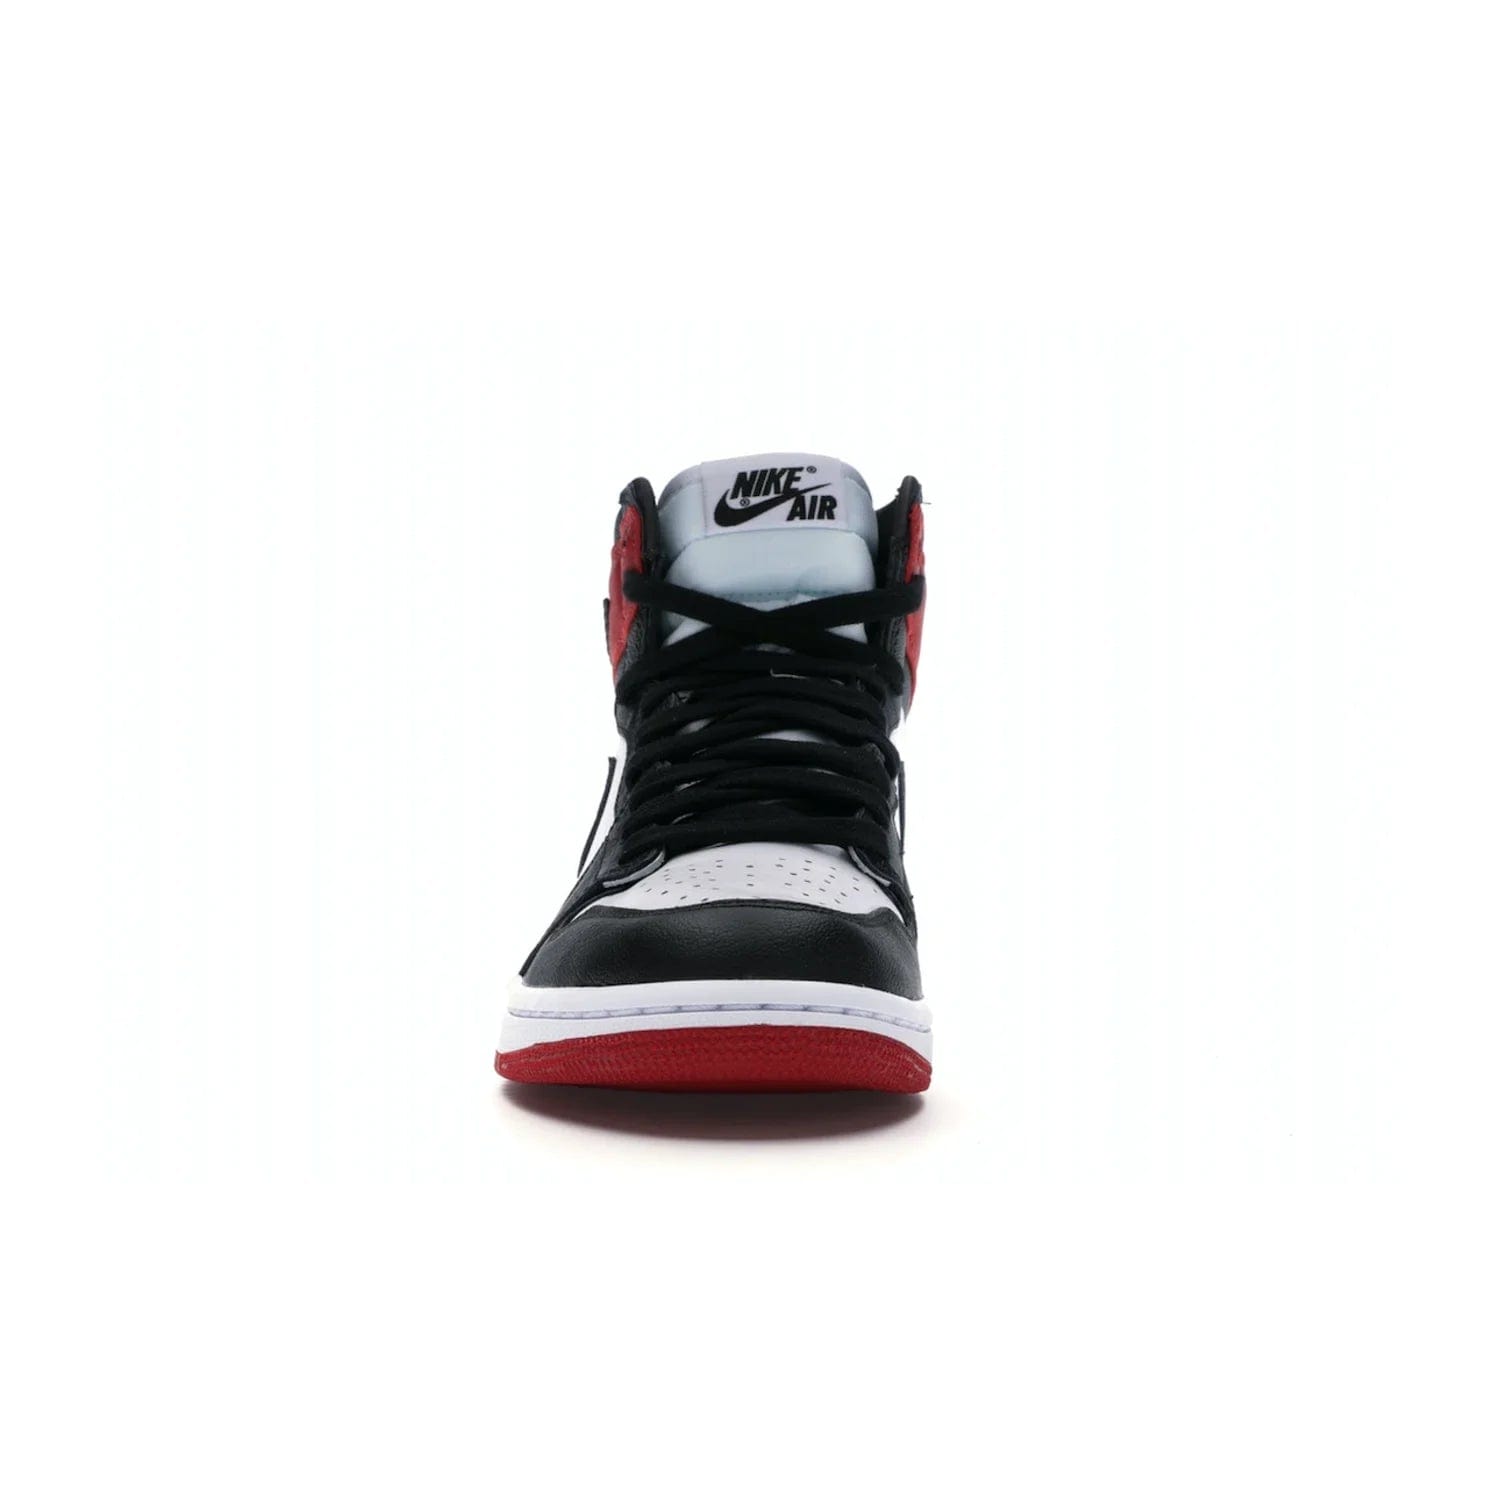 Jordan 1 Retro High Satin Black Toe (Women's) - Image 10 - Only at www.BallersClubKickz.com - Luxurious take on the timeless Air Jordan 1. Features a mix of black leather and satin materials with subtle University Red accents. Elevated look with metal Wings logo on the heel. Released in August 2019.